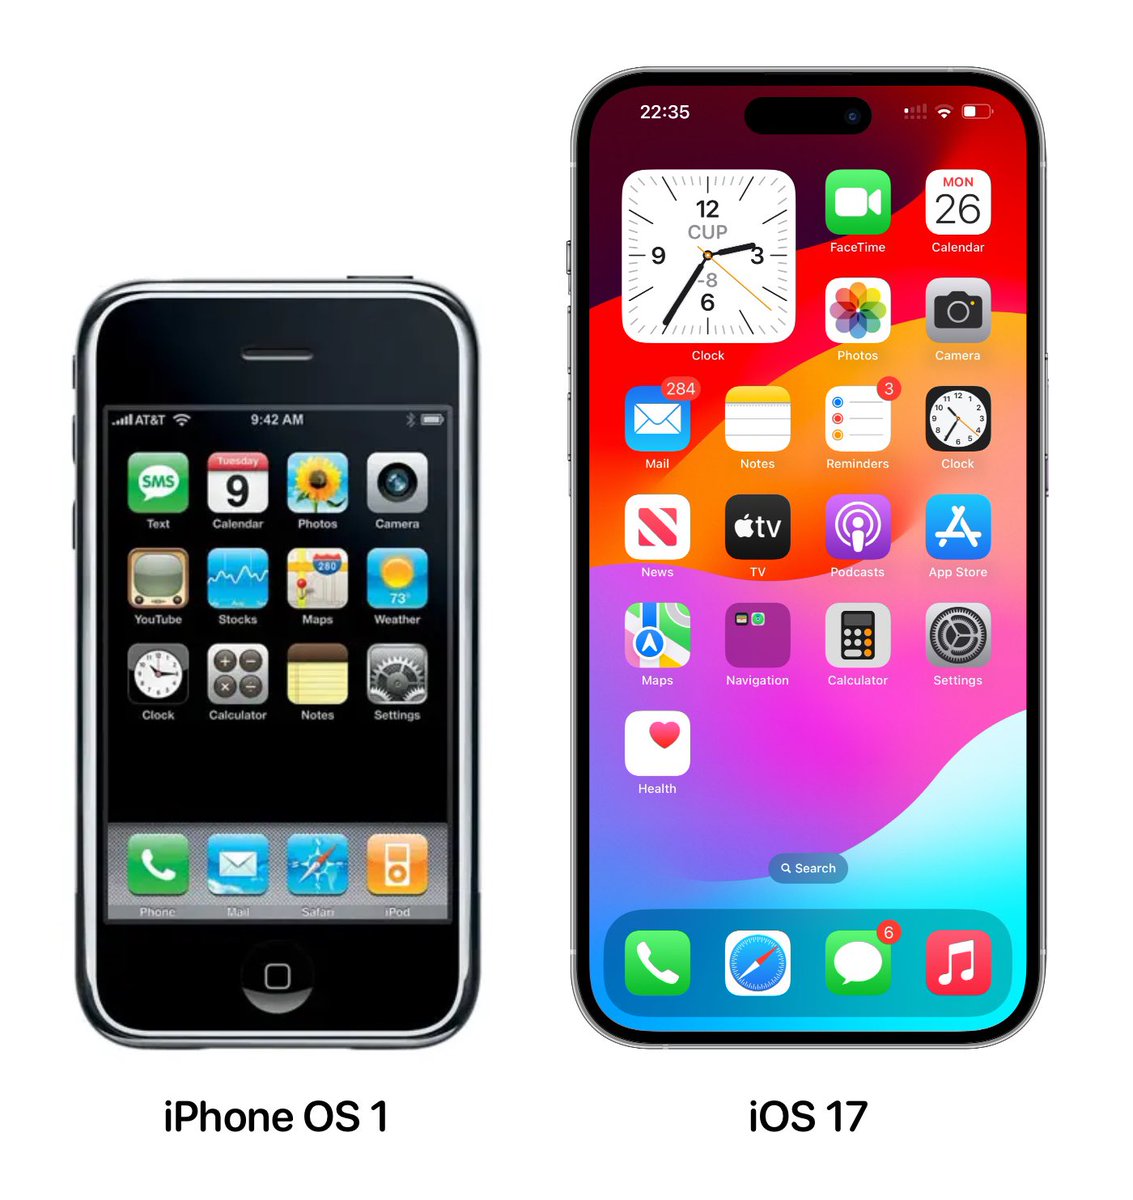 This is the first iPhone vs iPhone 14 Pro on iOS 17! Huge differences in design and icons 

What is your favorite iOS? 🤔 #ios17